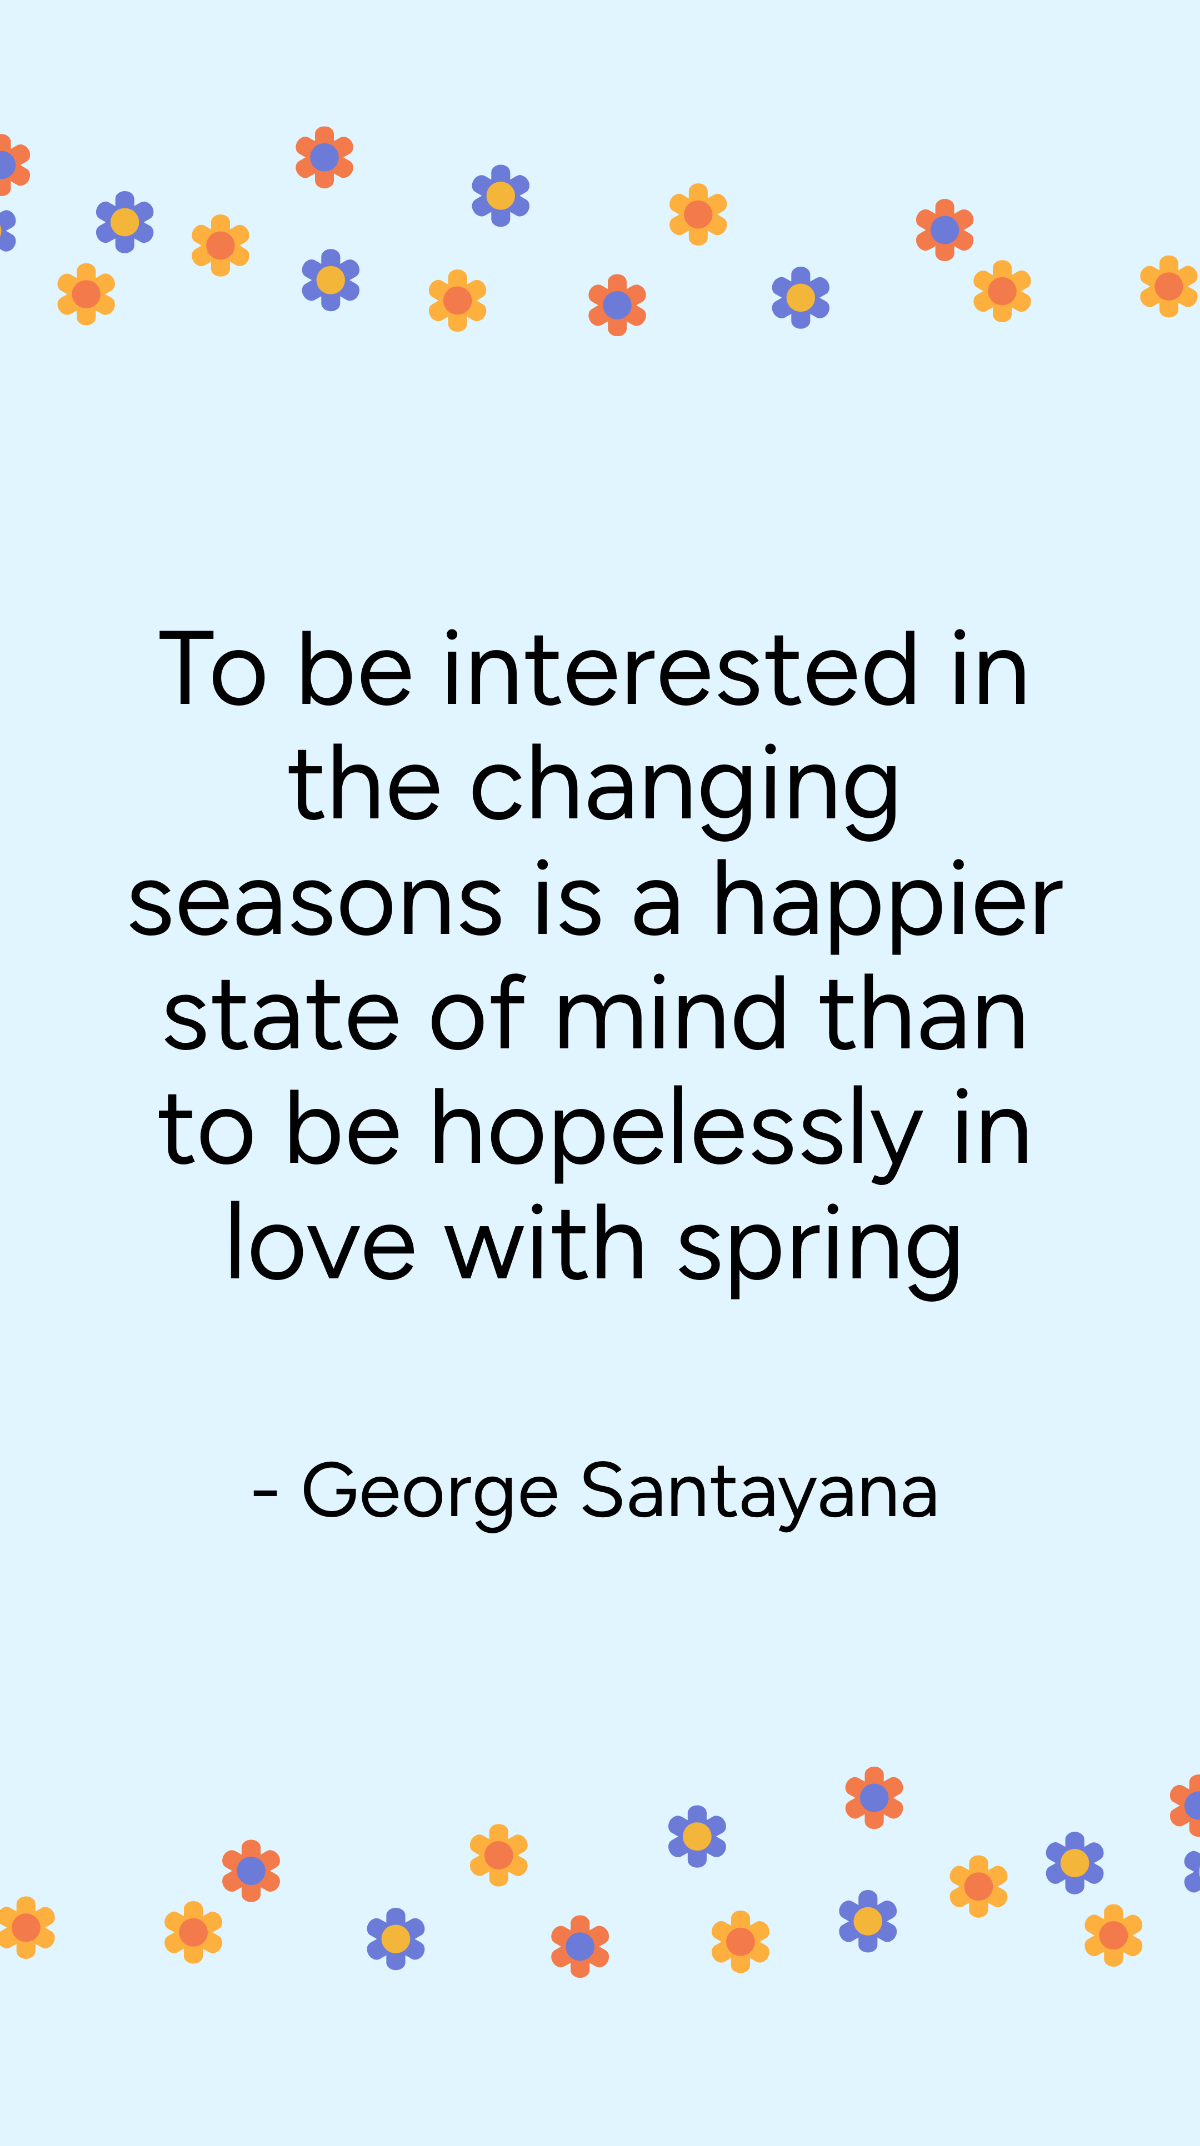 George Santayana - To be interested in the changing seasons is a happier state of mind than to be hopelessly in love with spring Template